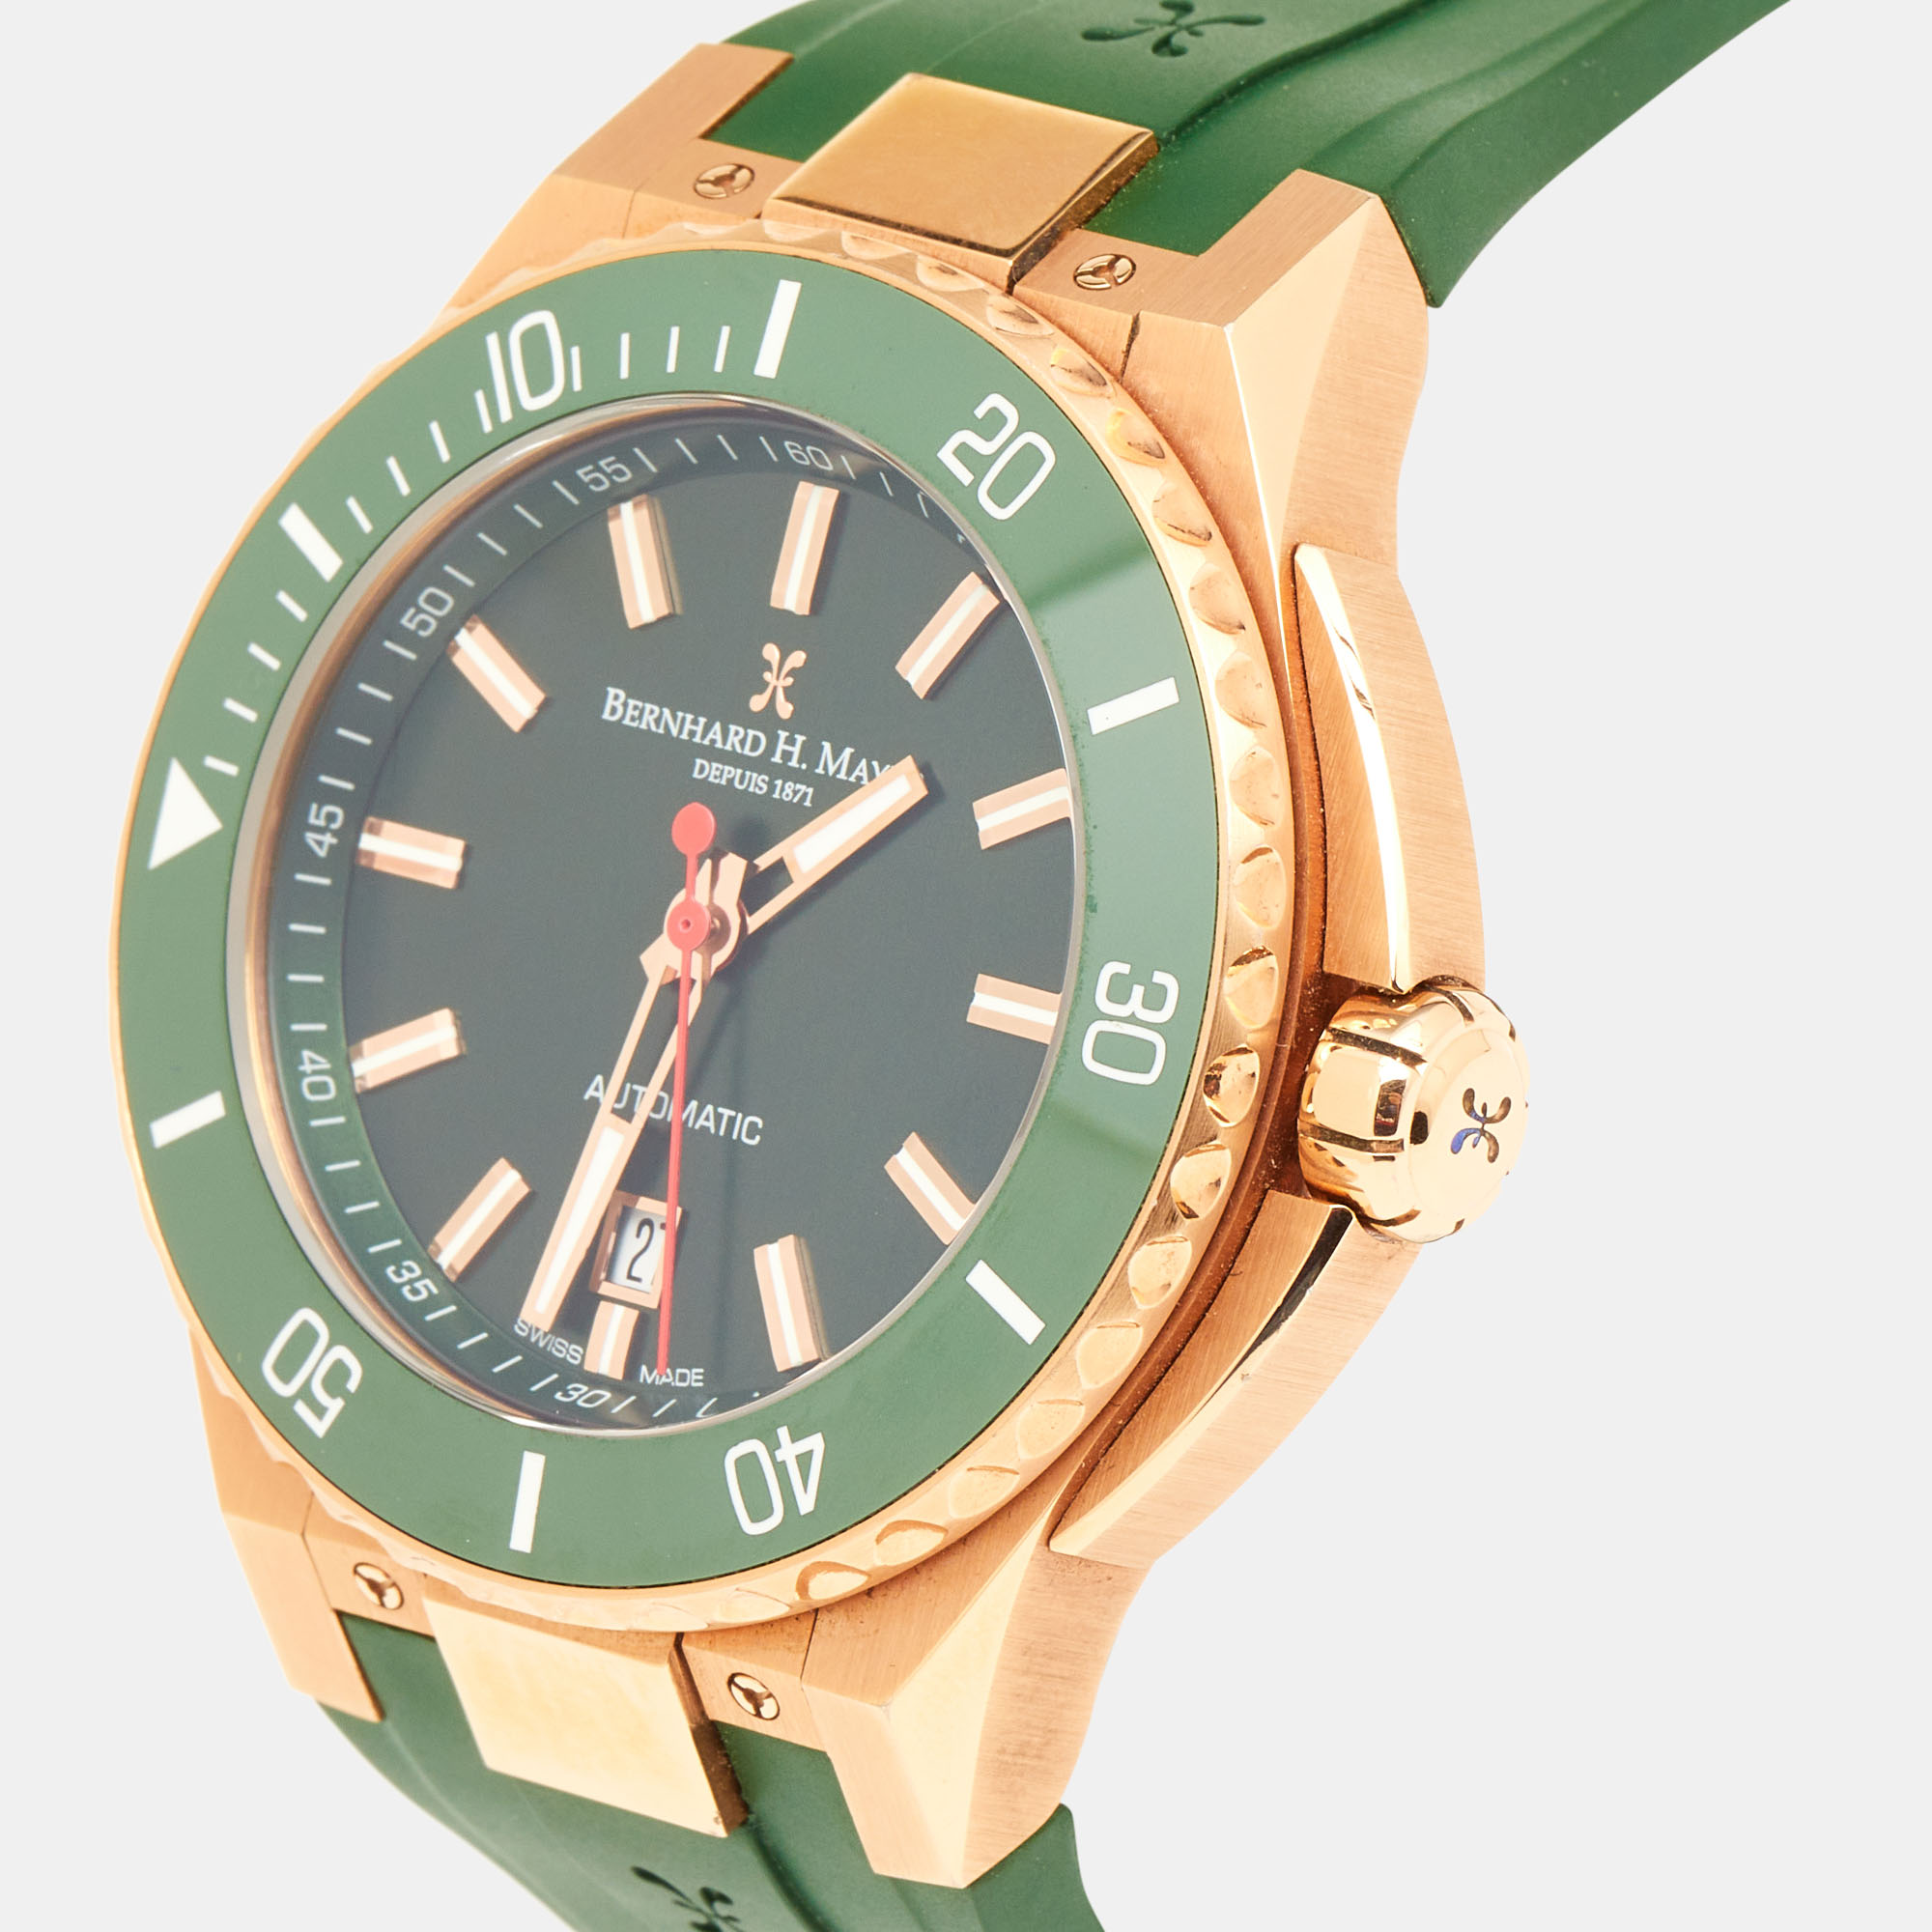 

Bernhard H. Mayer Green Ceramic Rose Gold PVD Plated Stainless Steel Rubber Limited Edition PowerMaster BH45T/CW Men's Wristwatch